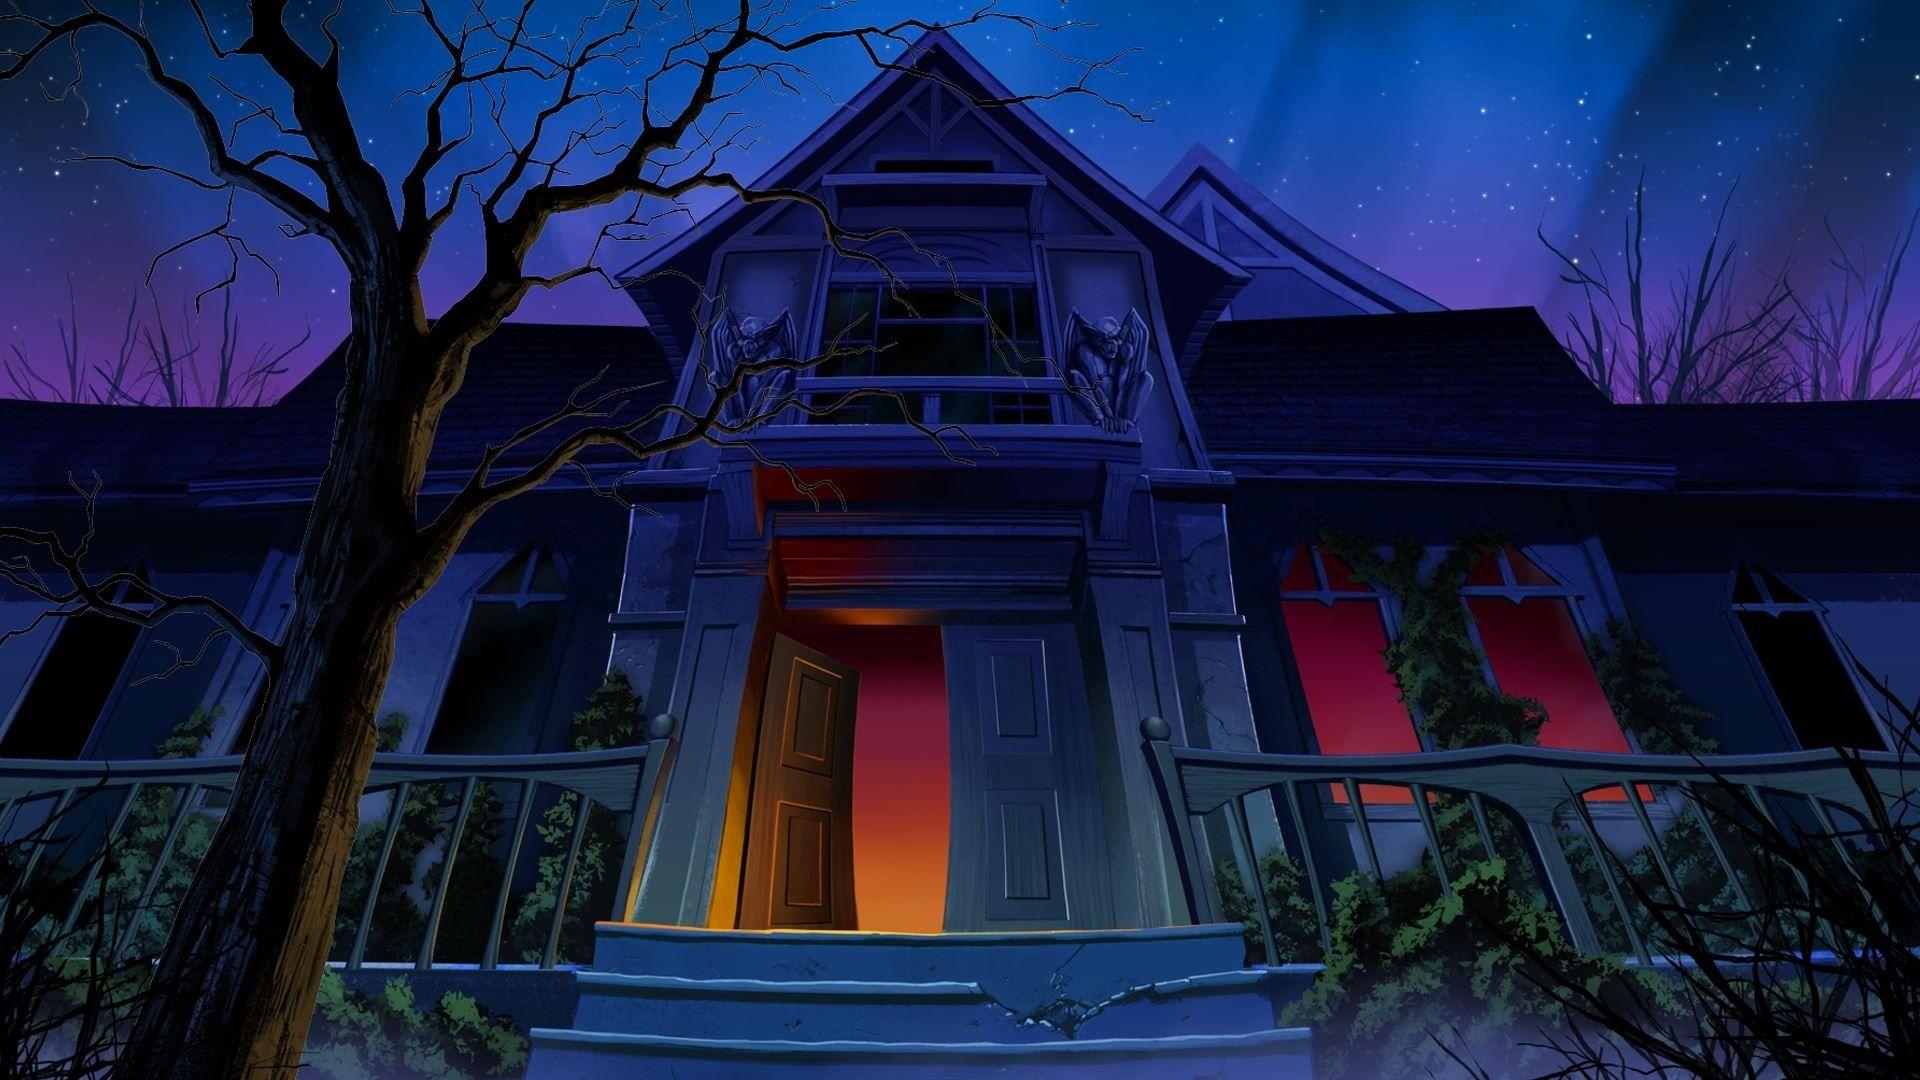 Haunted House Wallpaper. Halloween Creepy Scary House Background